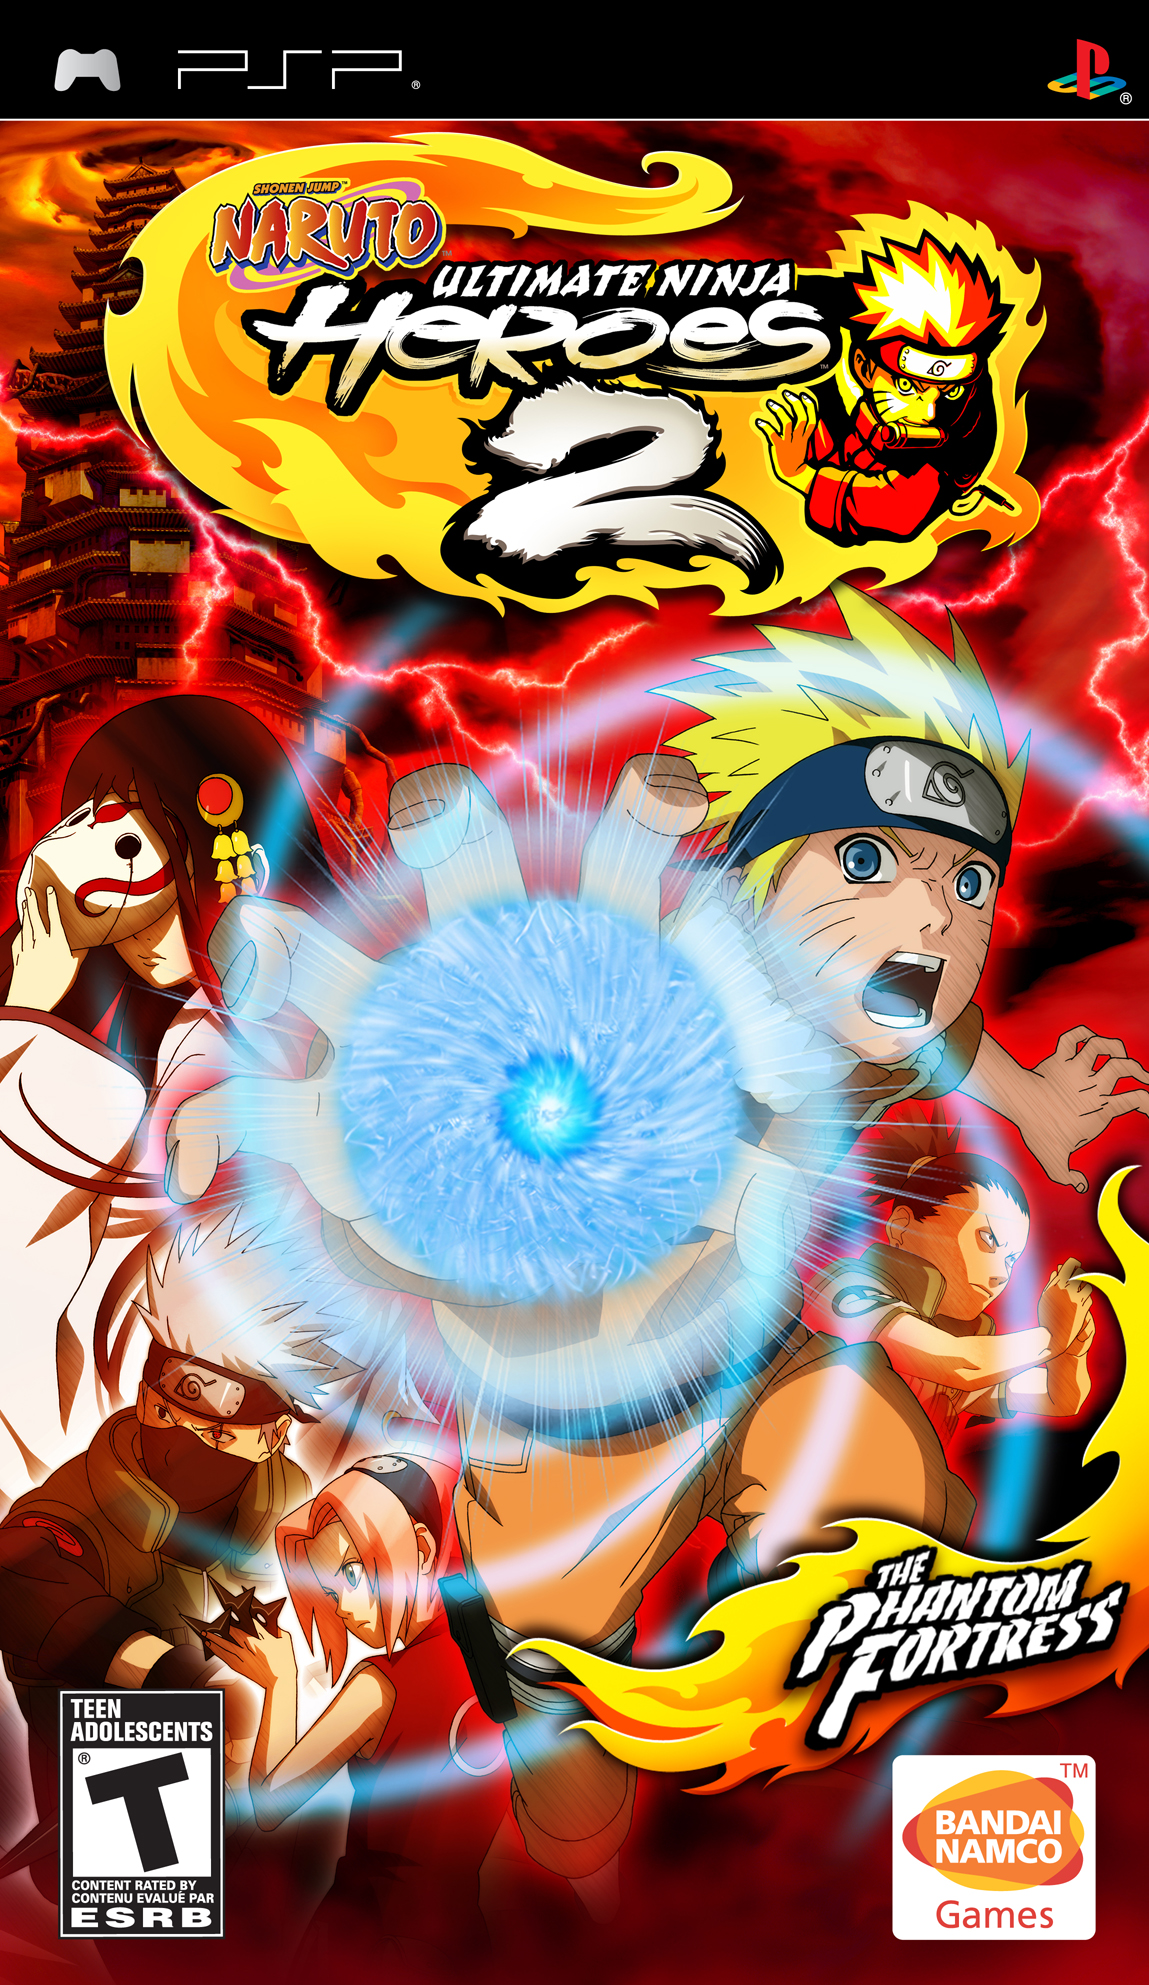 Naruto Shipuden The Hokage Ppsspp